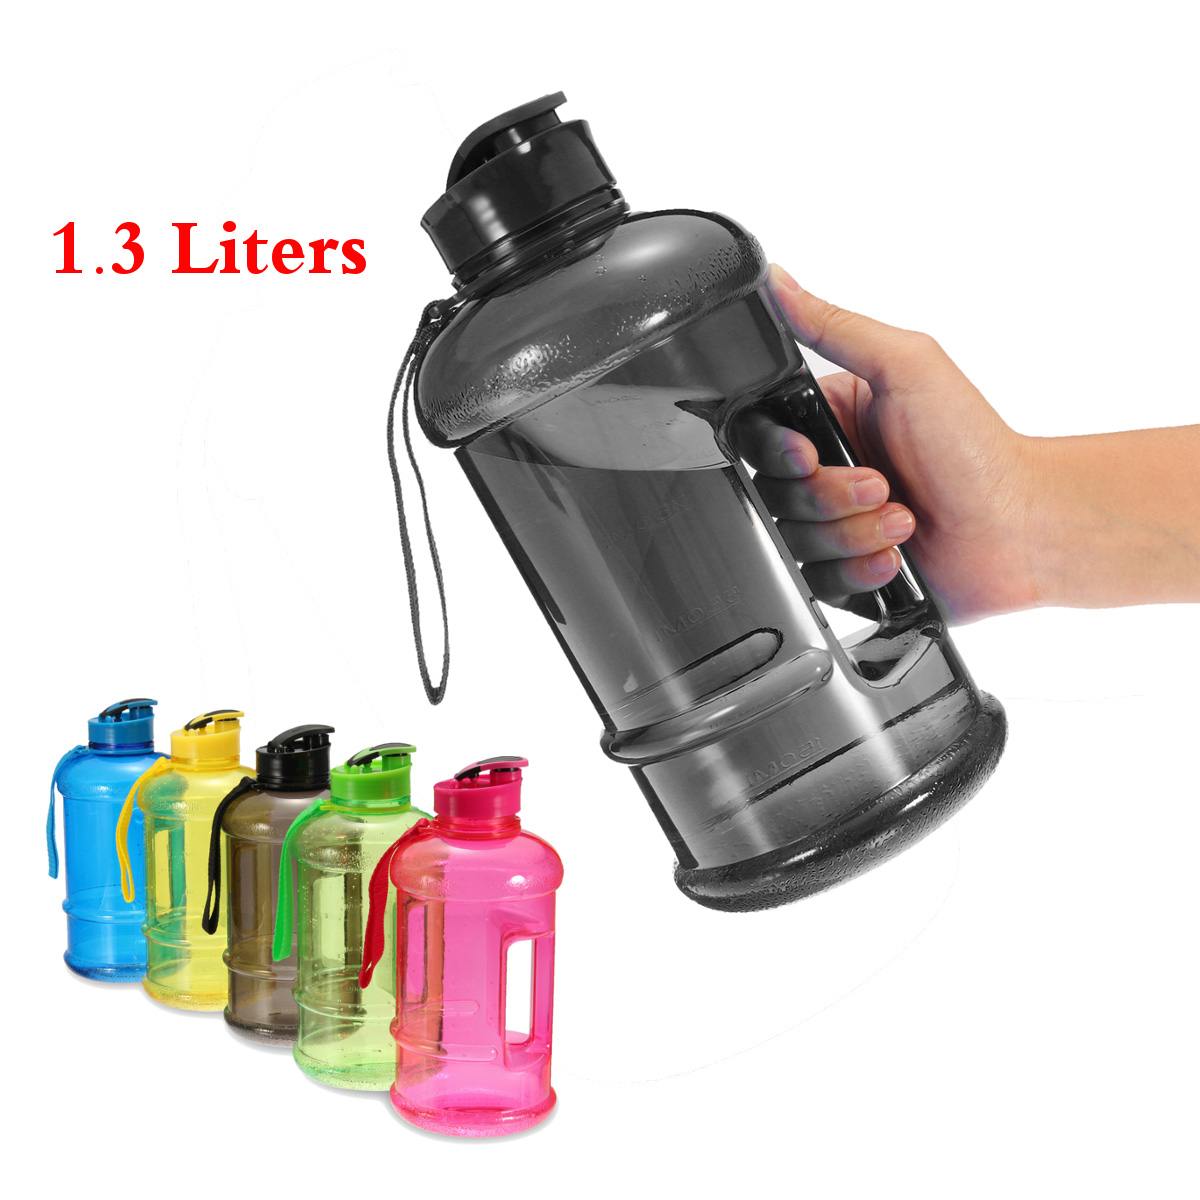 13L-BPA-Large-Drink-Water-Blottle-Sports-Gym-Fitness-Trainning-Bottle-Cup-1592087-1